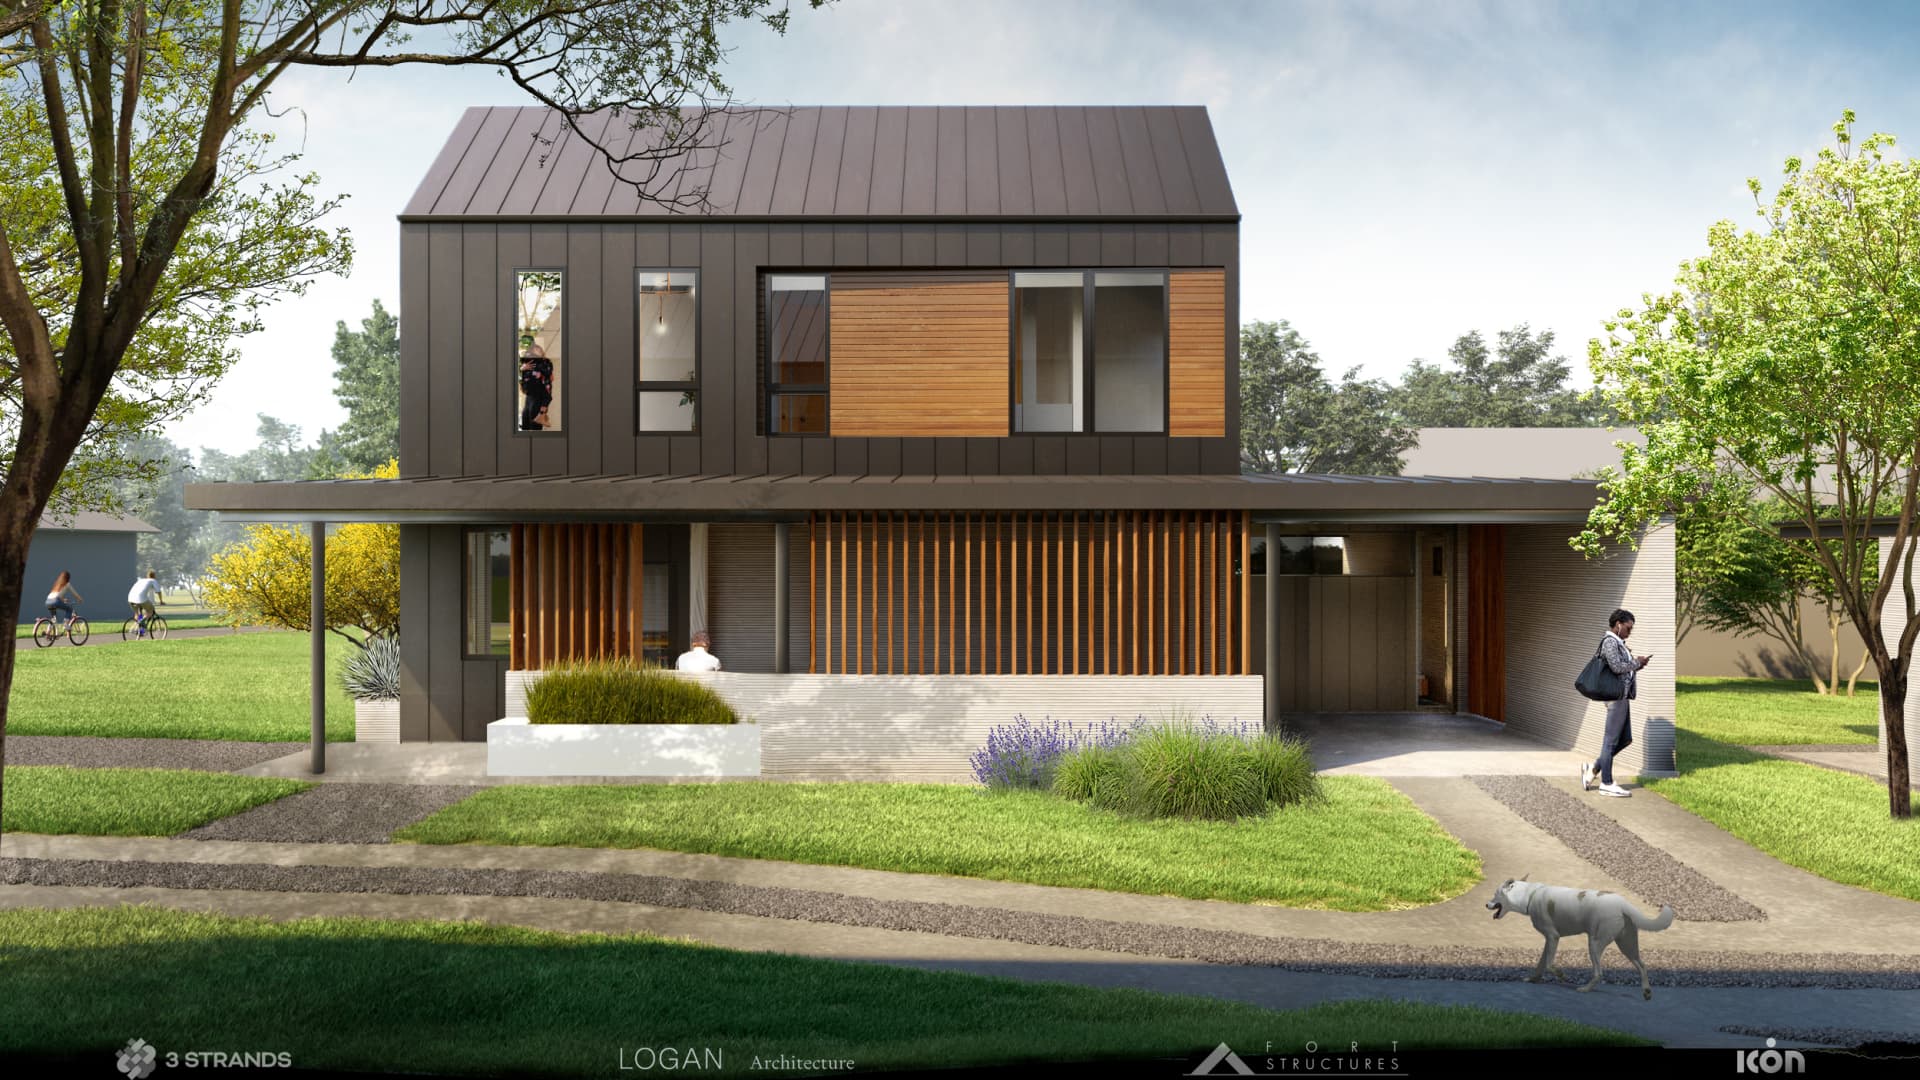 A rendering of a 3D printed home construction by 3Strands and ICON in Austin, Texas.